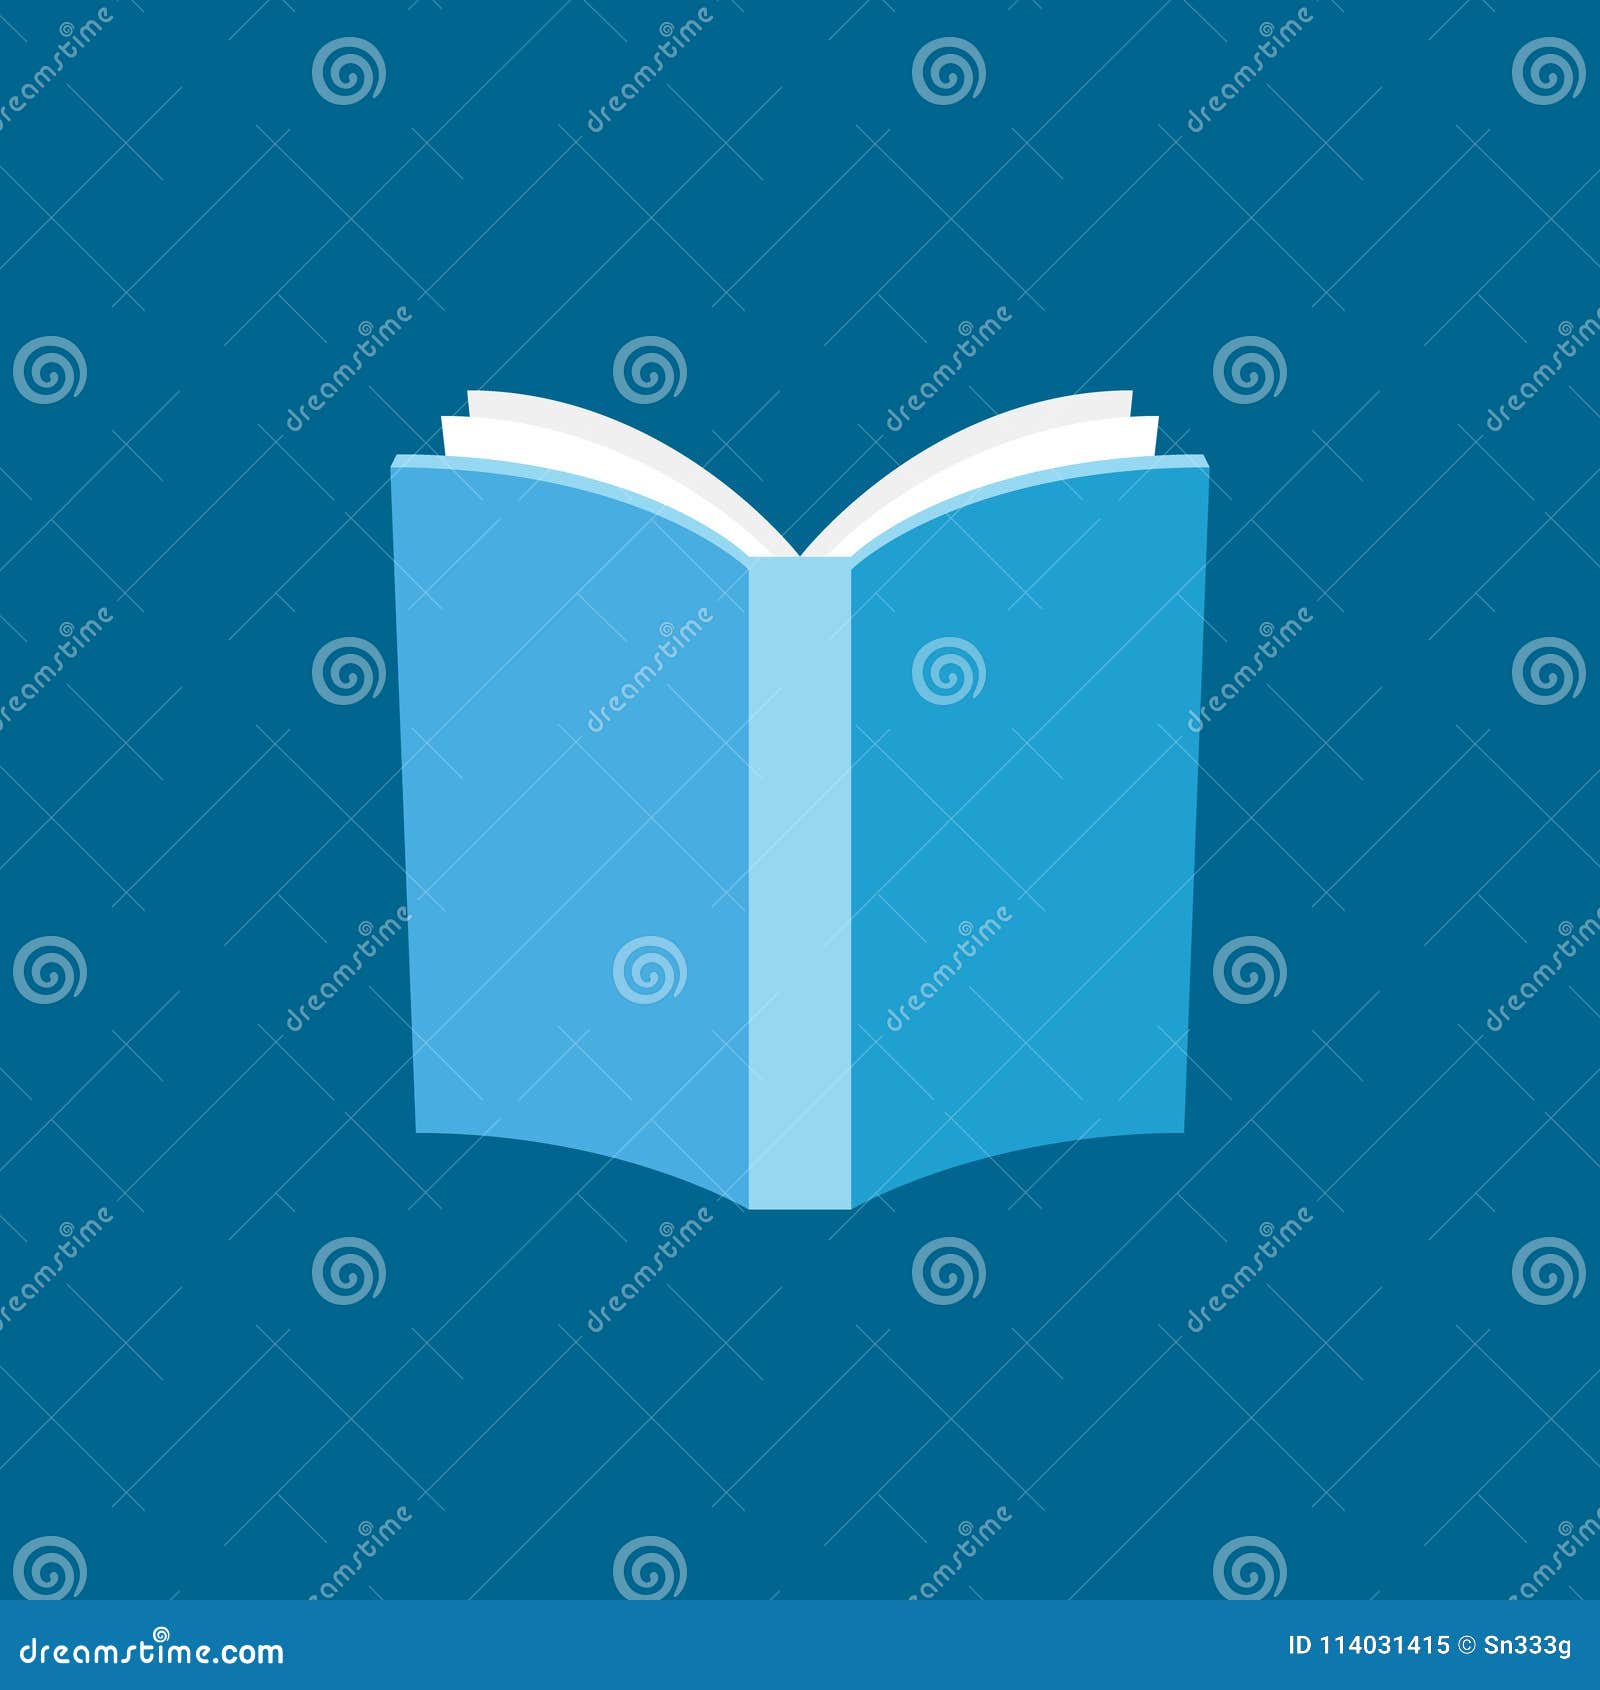 Book With White Pages Flat Vector Icon Stock Vector - Illustration of